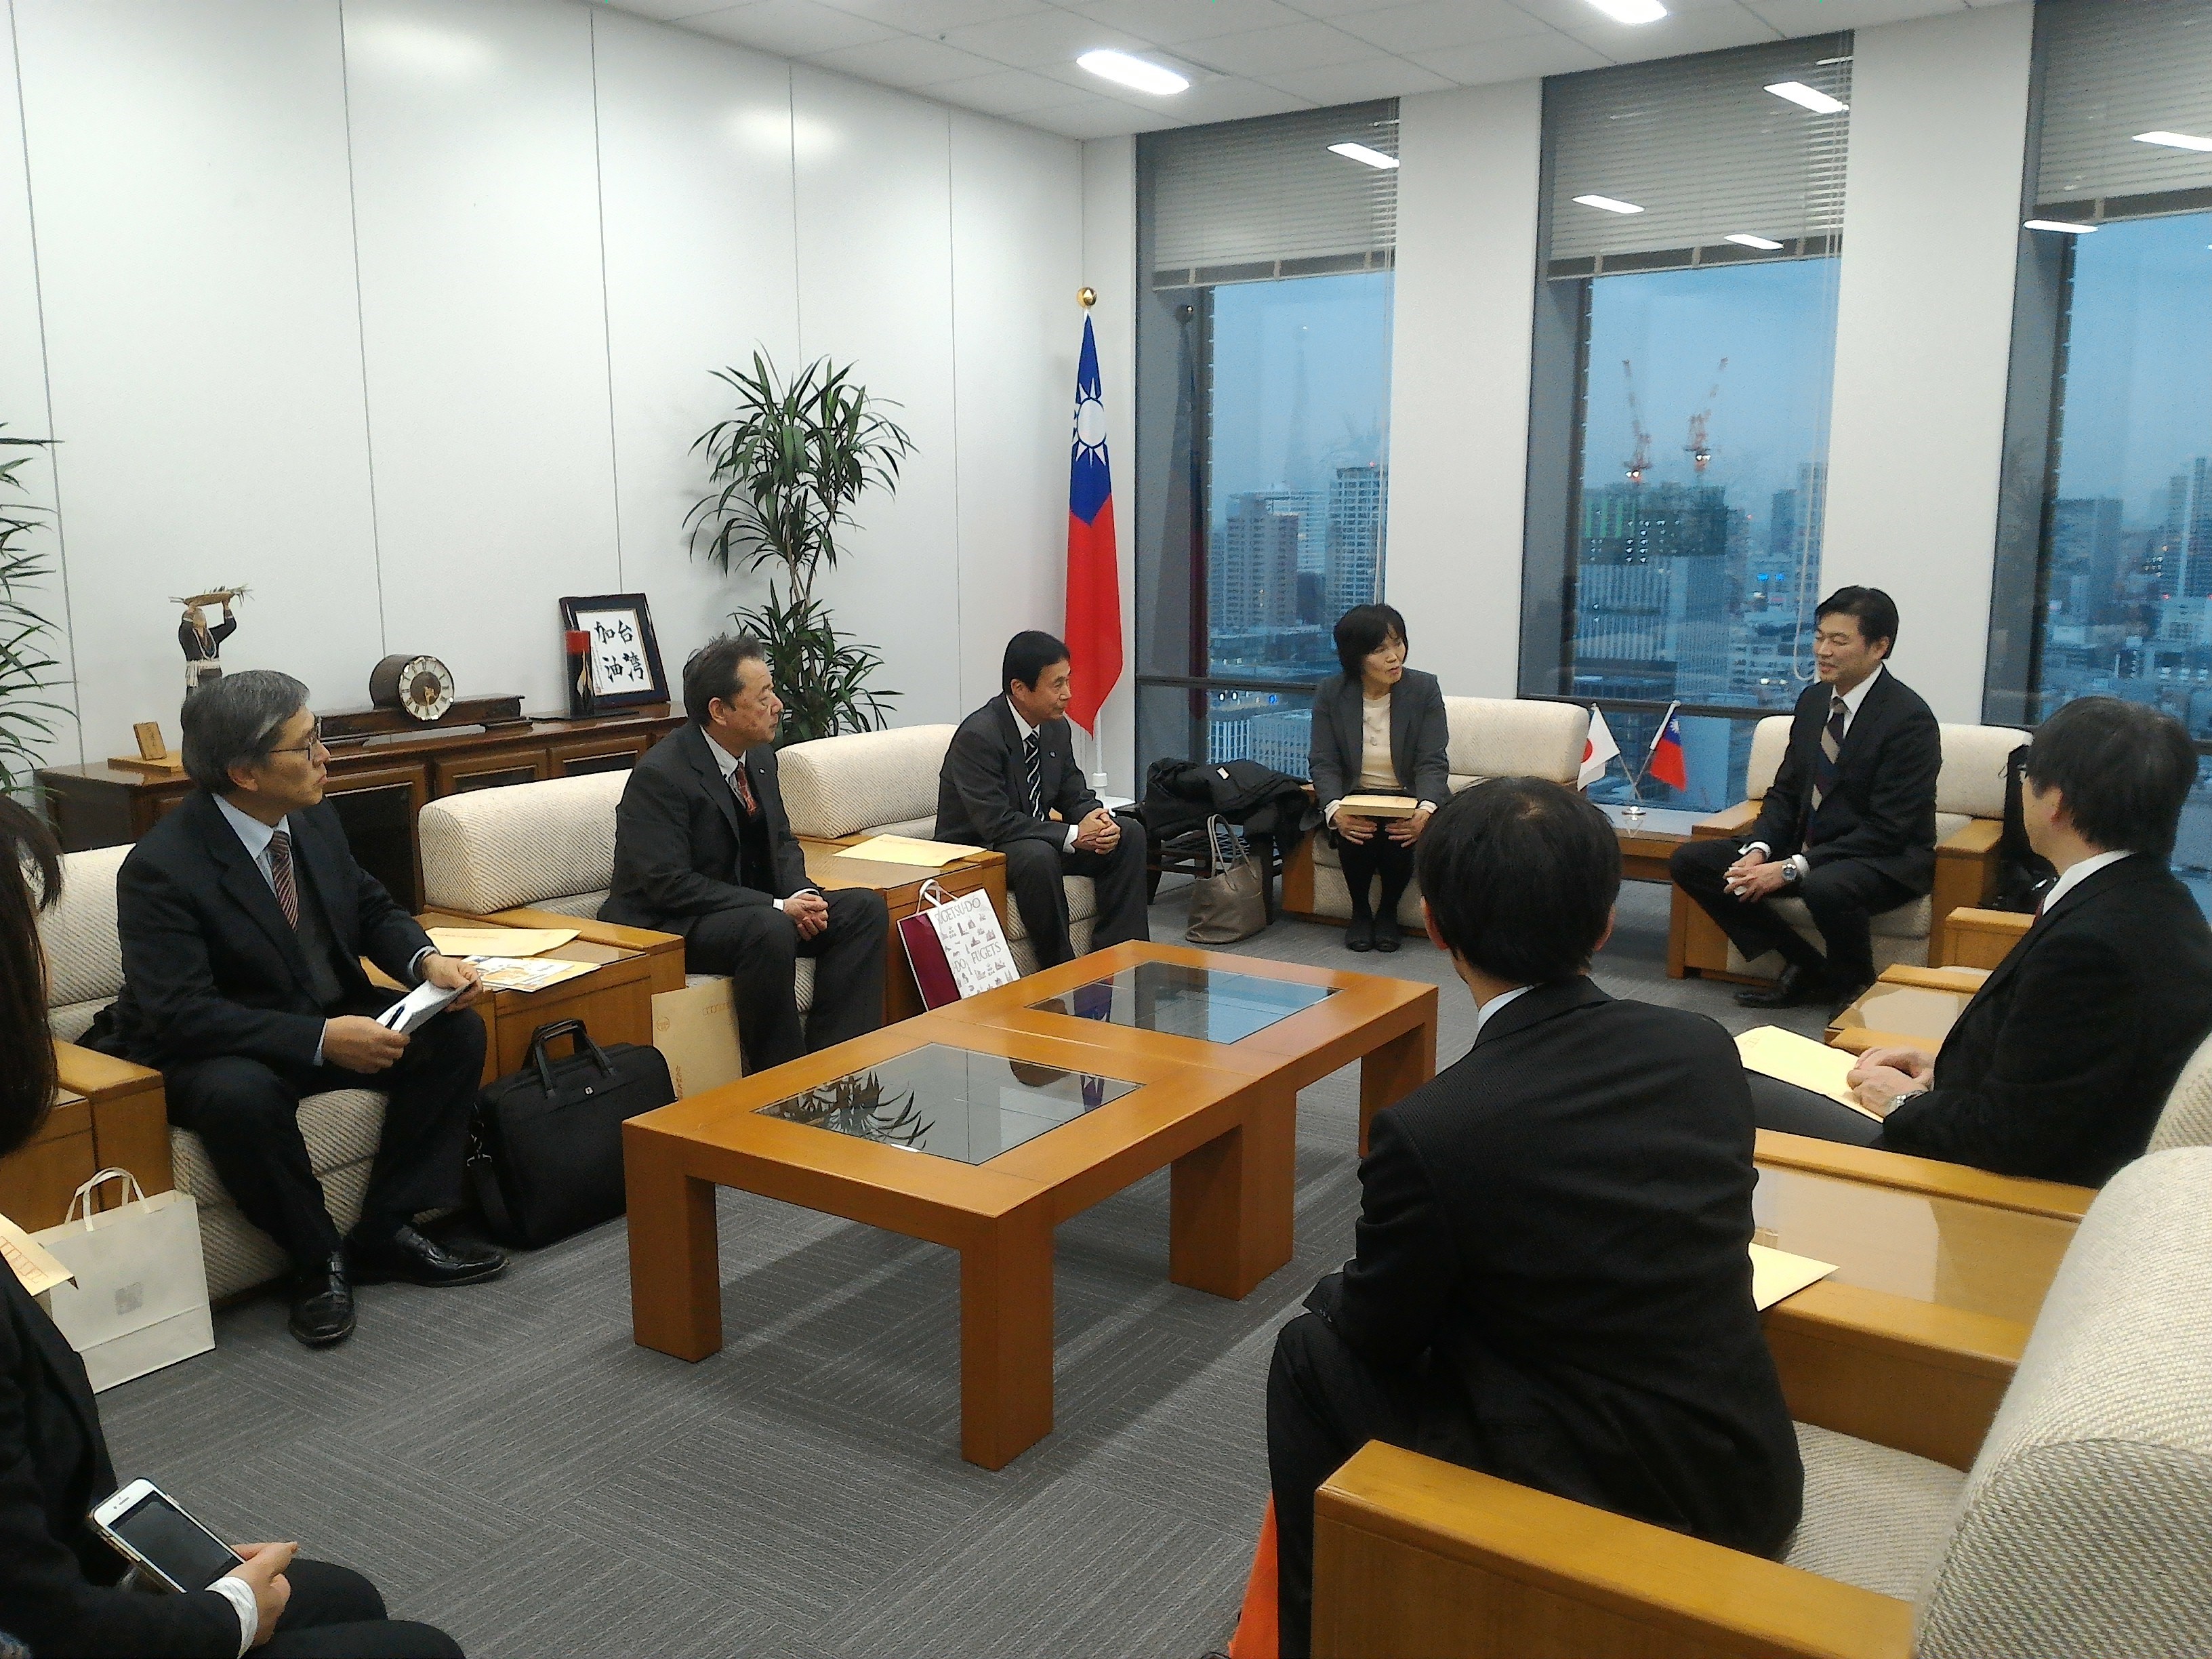 Director Lee Shyh-Bing of the Taipei Economic and Cultural Office in Osaka receives officials from Prefecture and County Level Departments in Japan’s Kinki Region